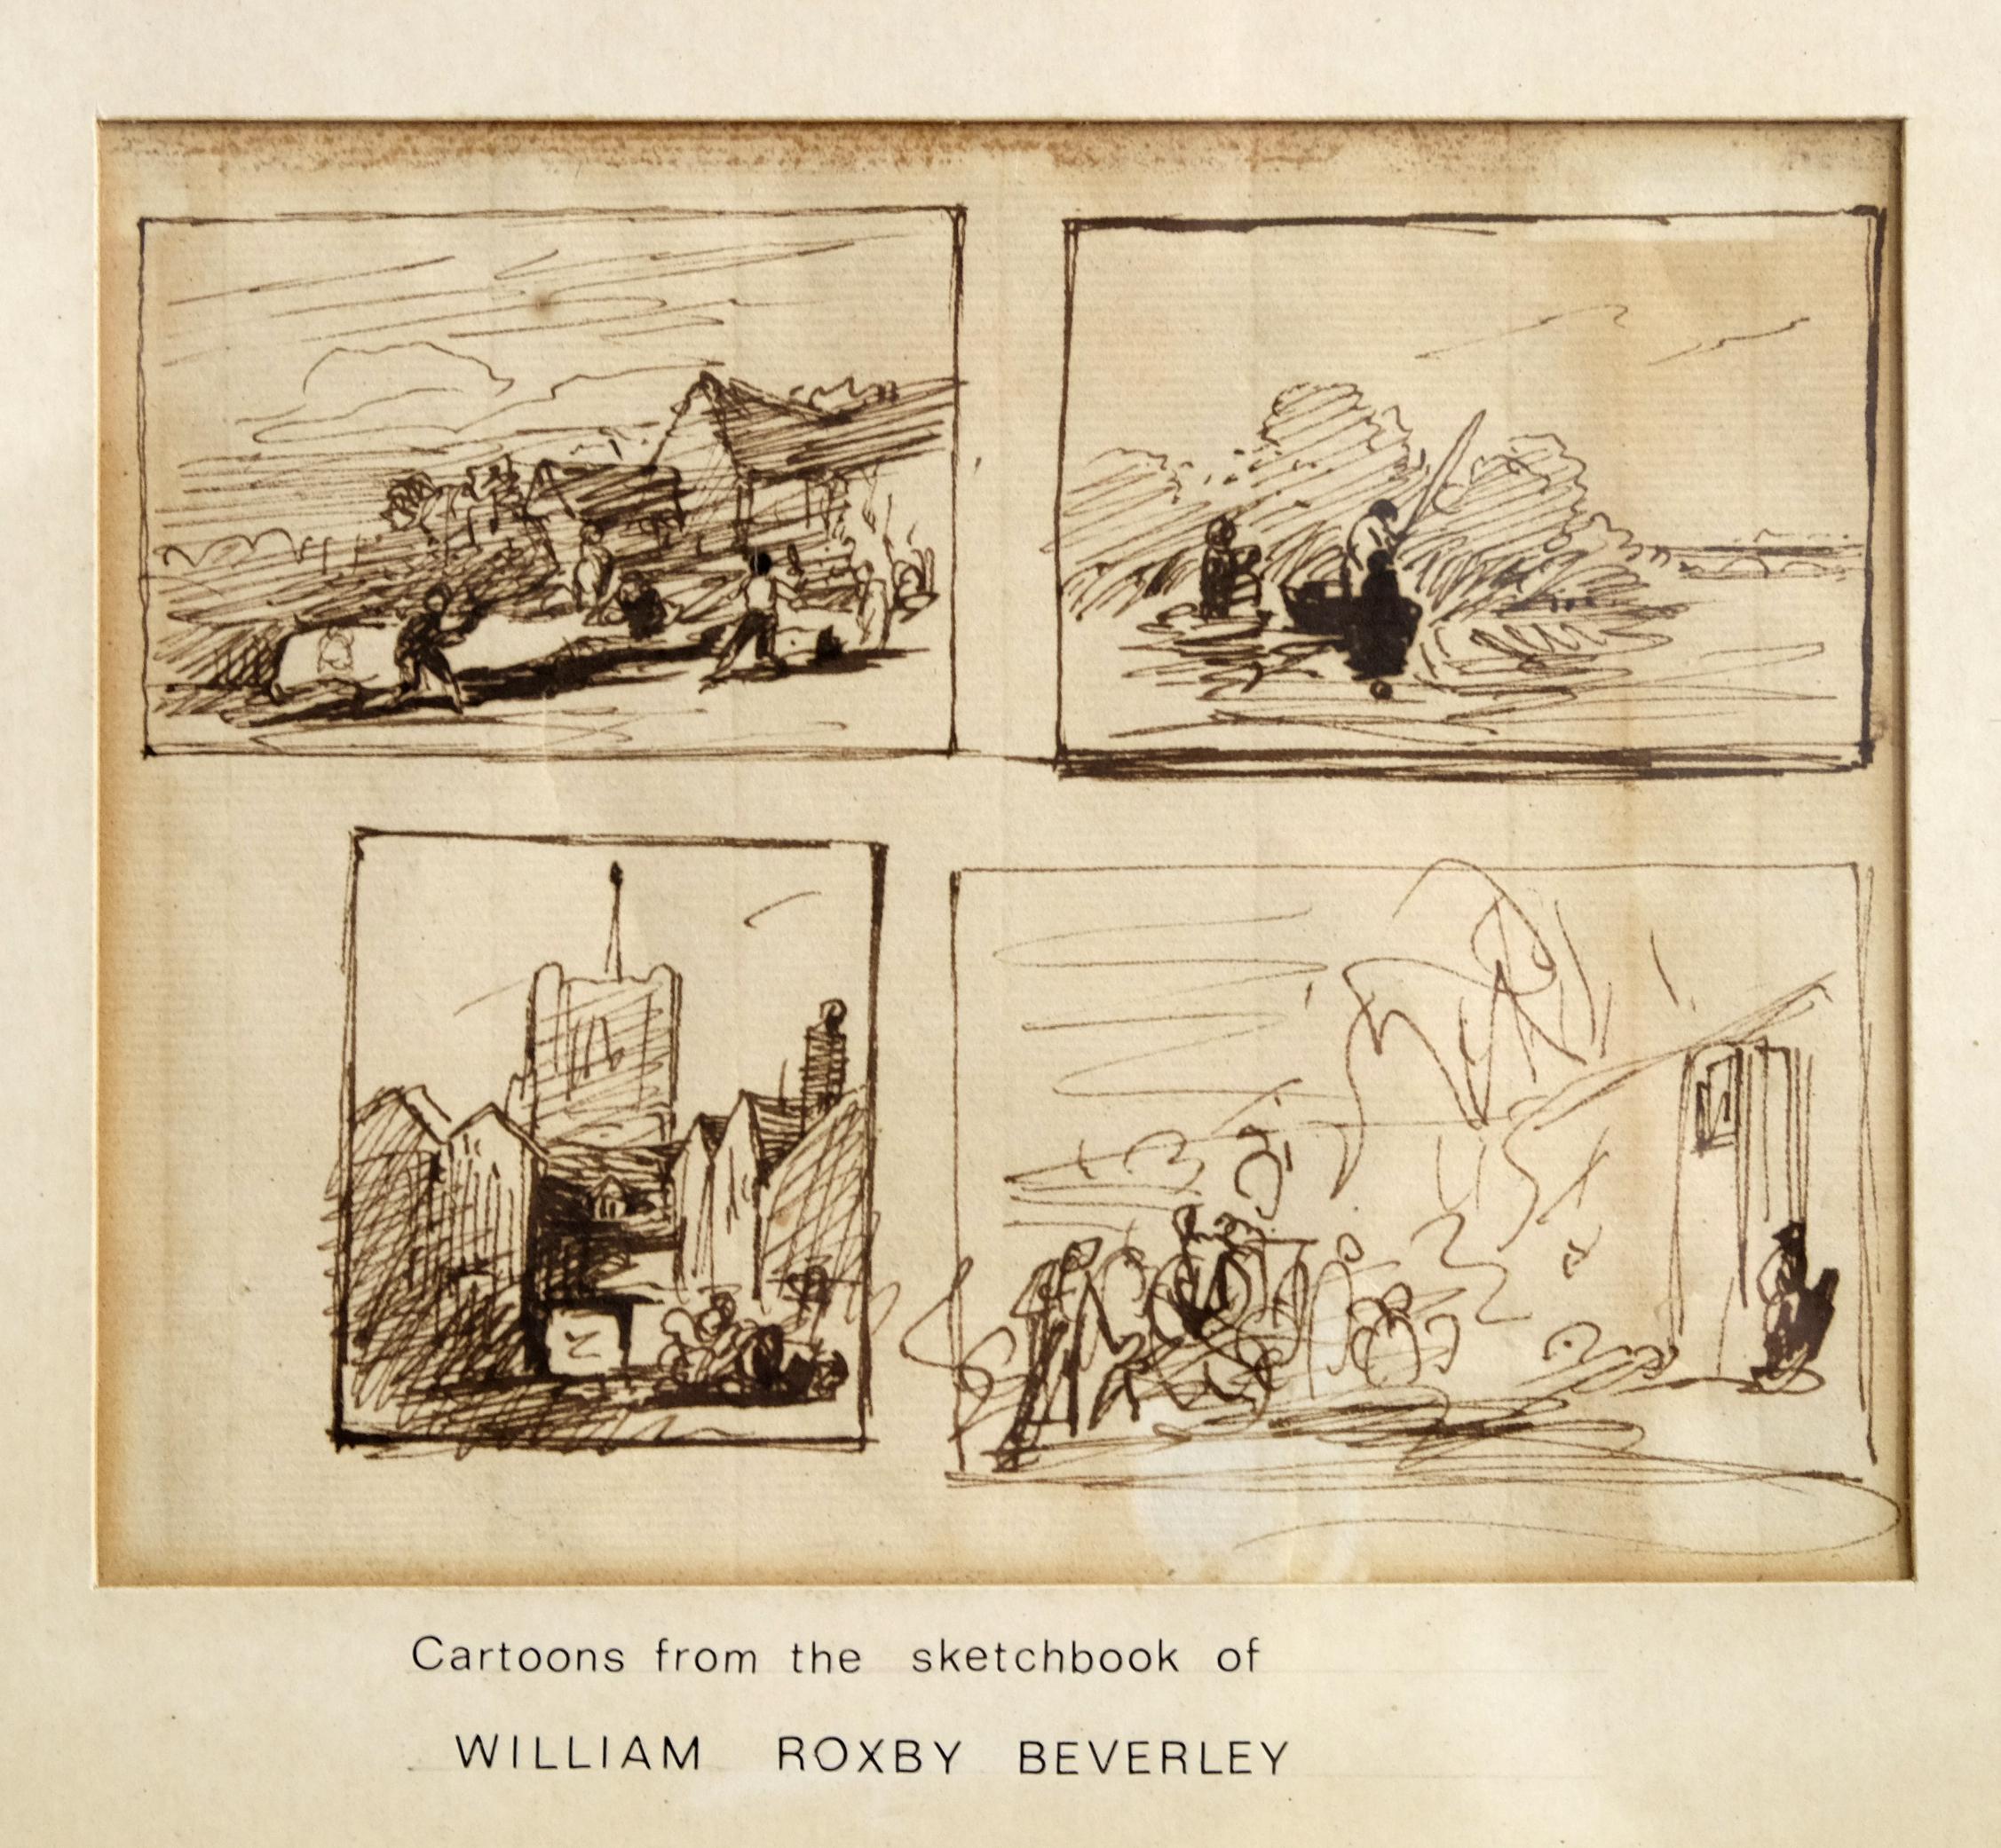 An intriguing framed and glazed page from the sketchbook of William Roxby Beverley, renowned 19th century theatrical scene painter and artist.

Born into a theatrical family William Roxby Beverley (1811-1889) soon rose to fame as one of the